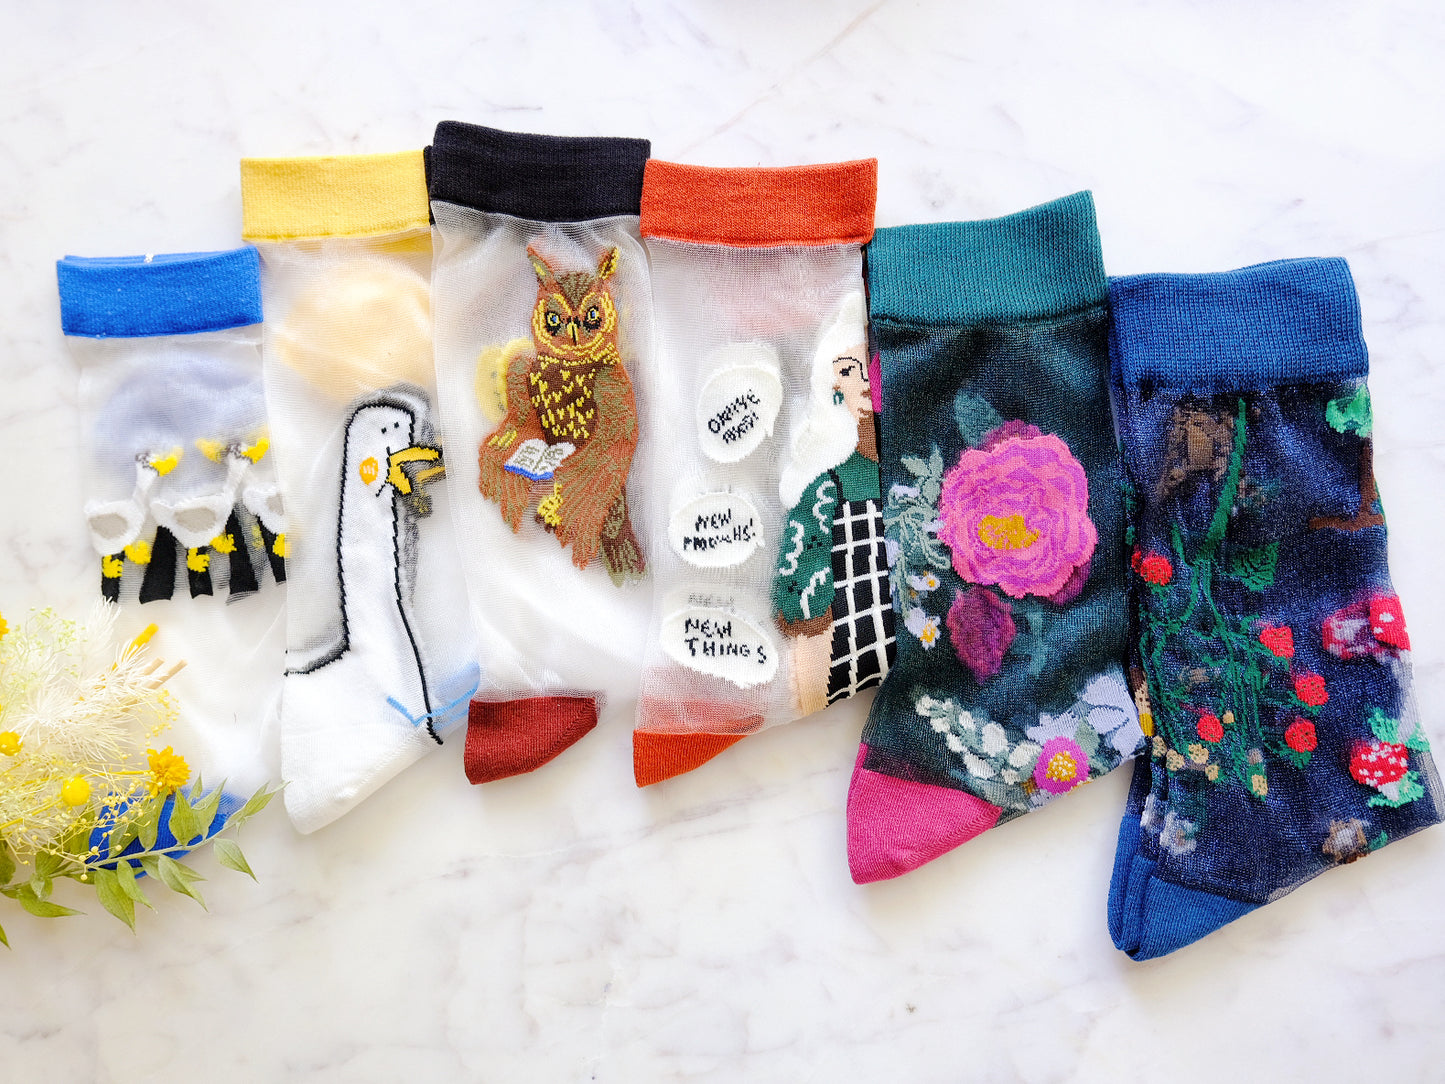 Miss June’s | Women’s Glass Silk-like Transparent socks | Cute | Colorful | Summer | Patterned | Gift Idea | Casual | Comfortable | Floral |